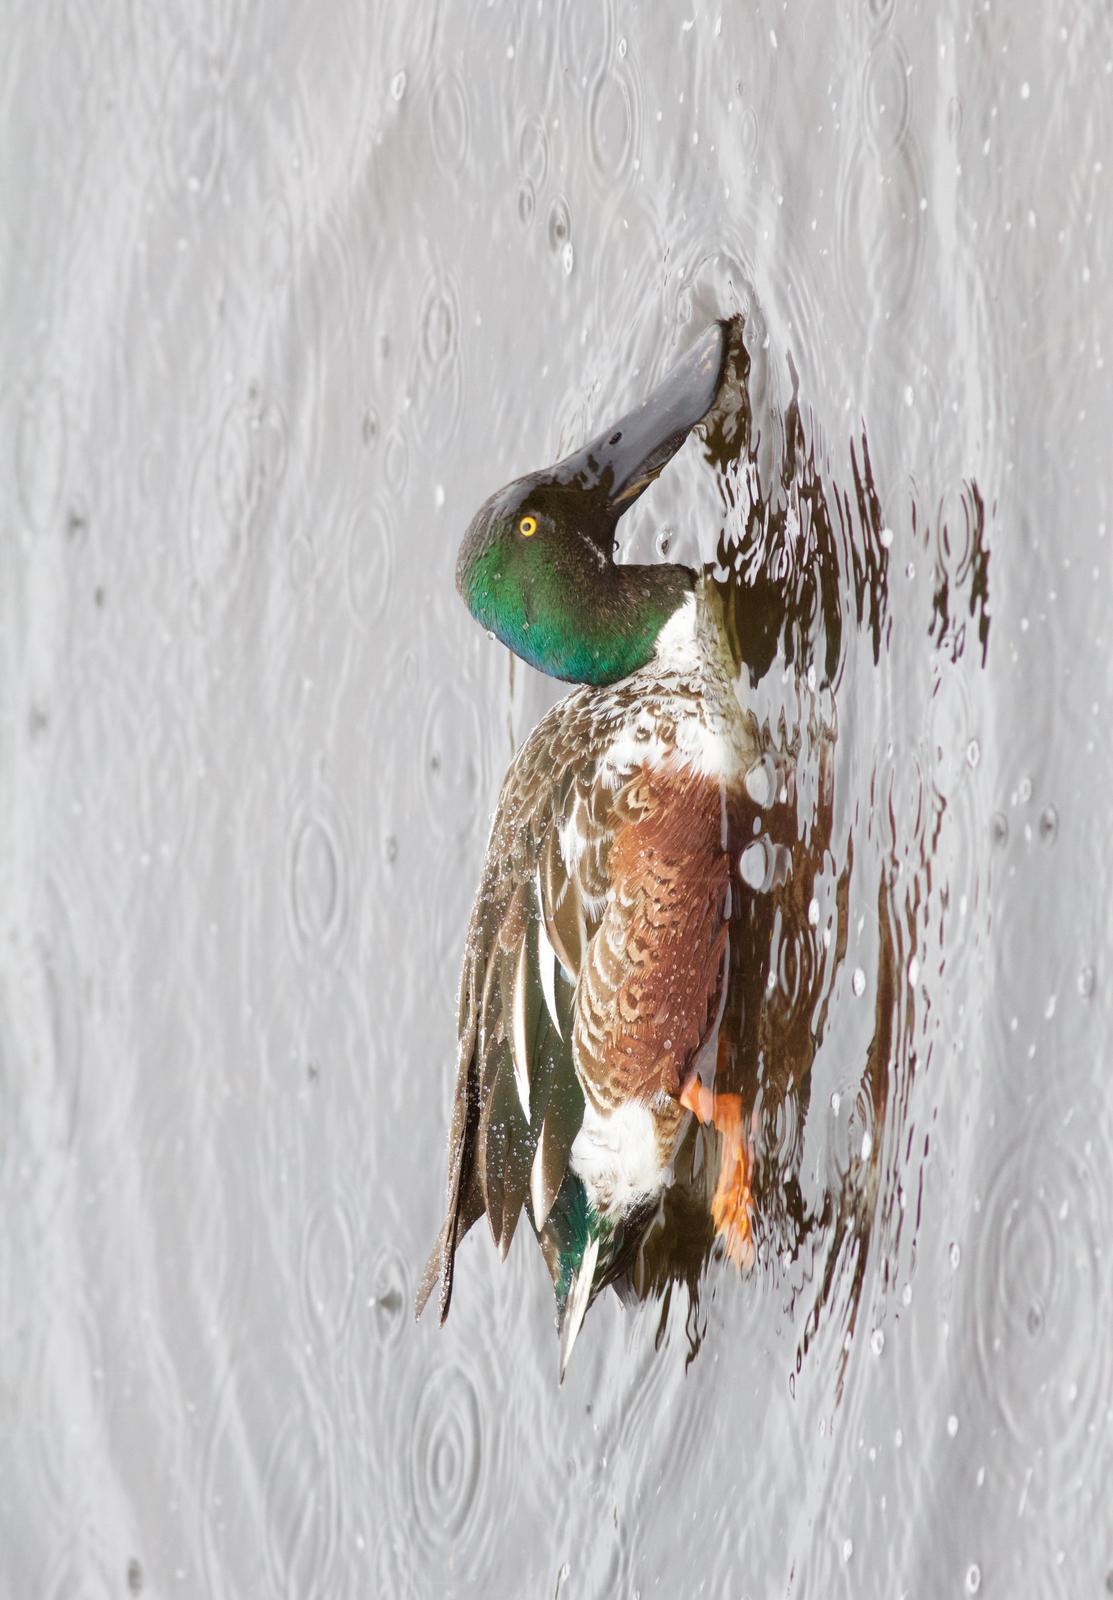 Northern Shoveler Photo by Kathryn Keith